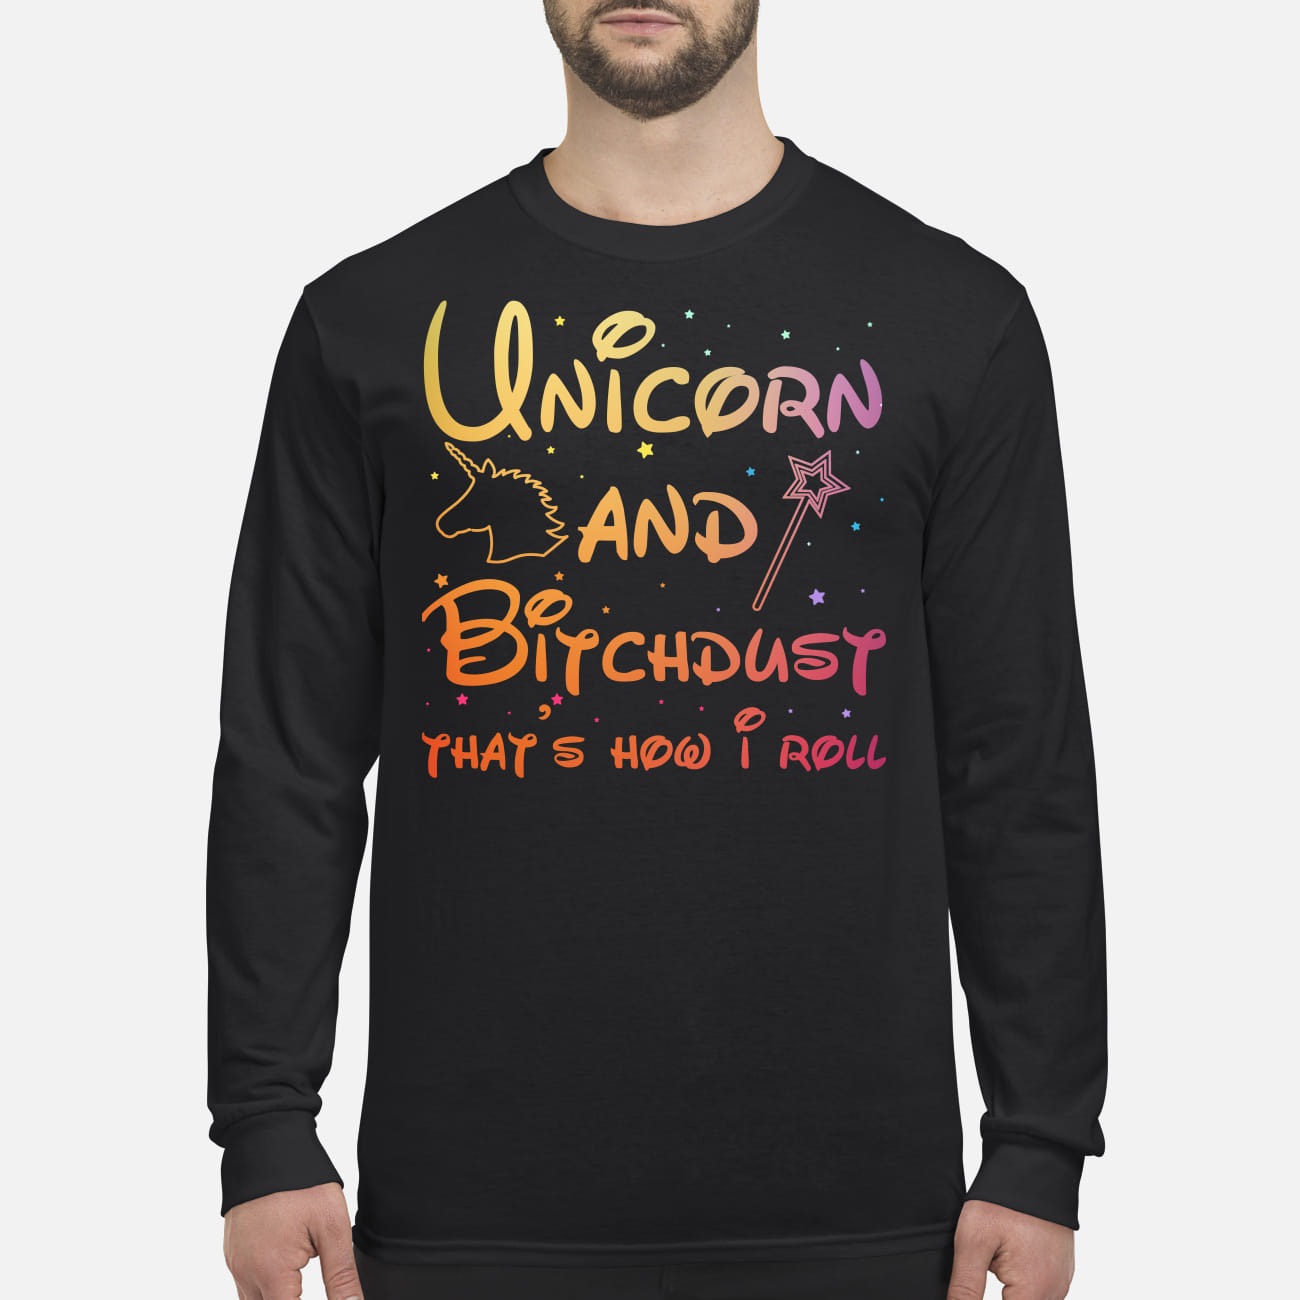 Unicorn and bitchdust that's how I roll men's long sleeved shirt